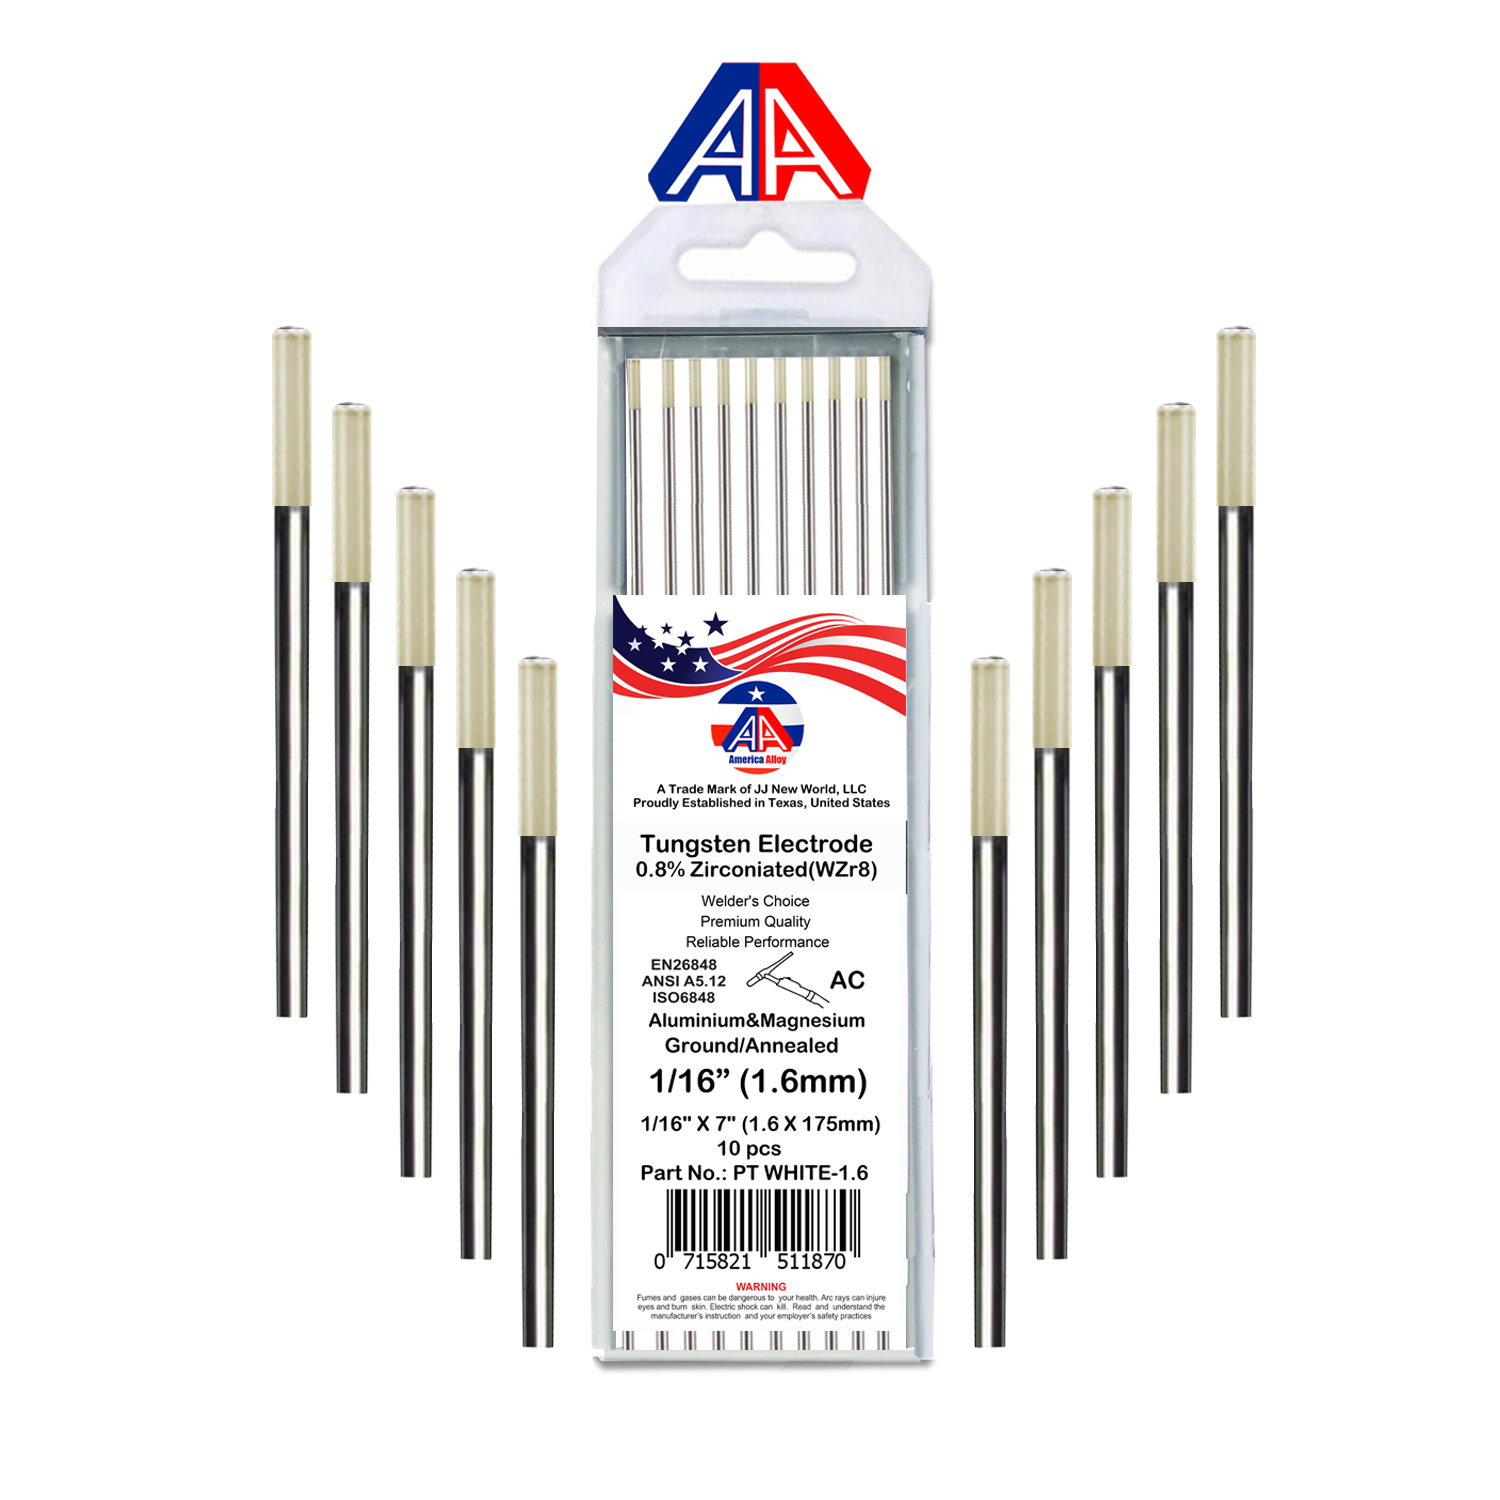 10 Pcs of WFDF9-Q Electrode,Heliarc Tungsten,3/32 In. 